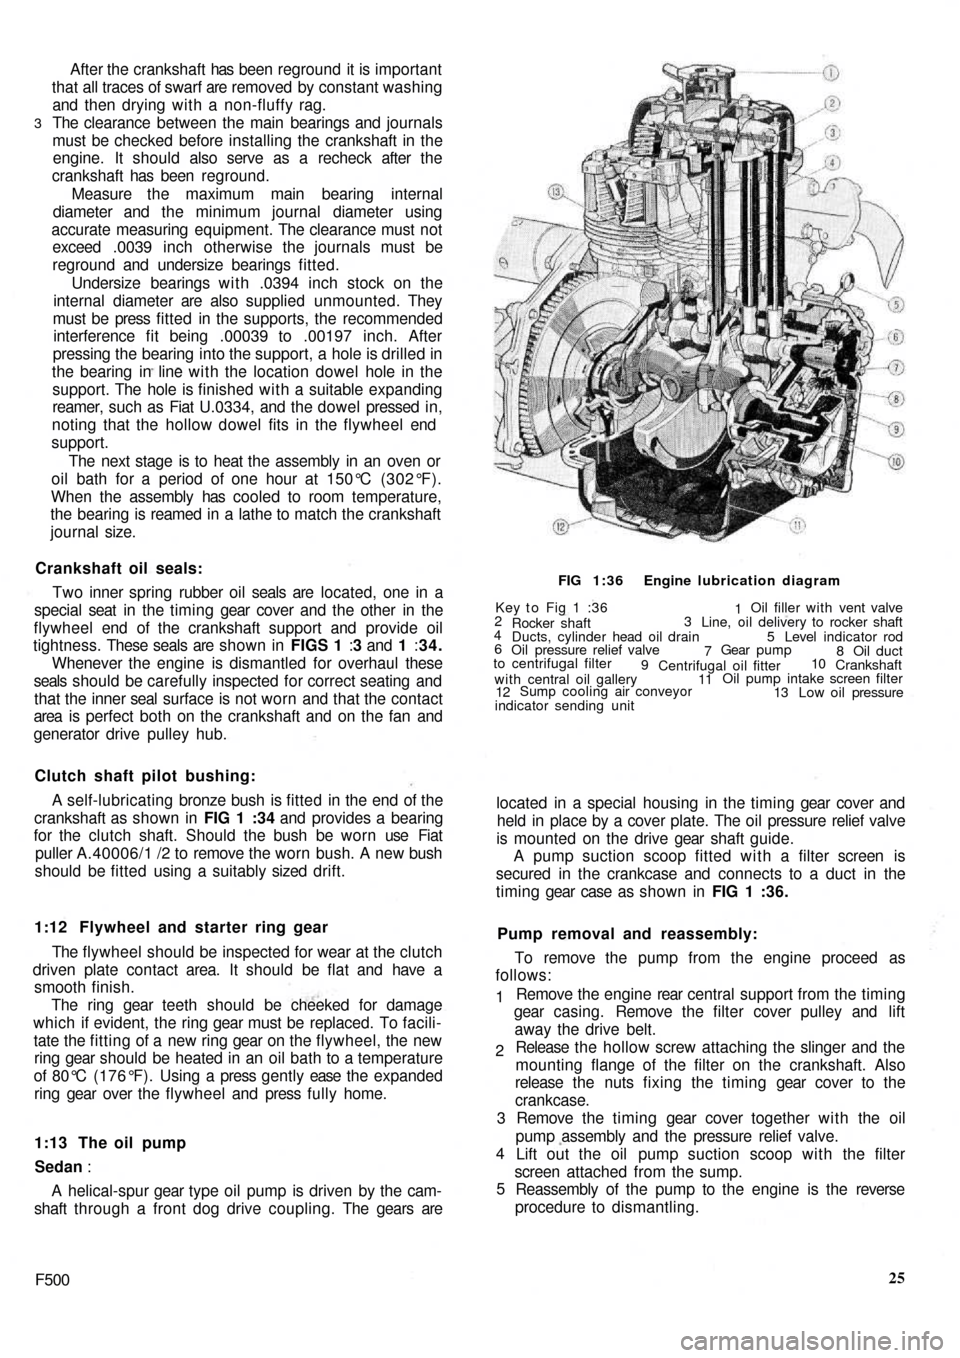 FIAT 500 1969 1.G Workshop Manual After the  crankshaft  has been reground  it is important
that all traces of swarf are removed  by constant washing
and then drying with a non-fluffy rag.
The clearance between the main bearings and j